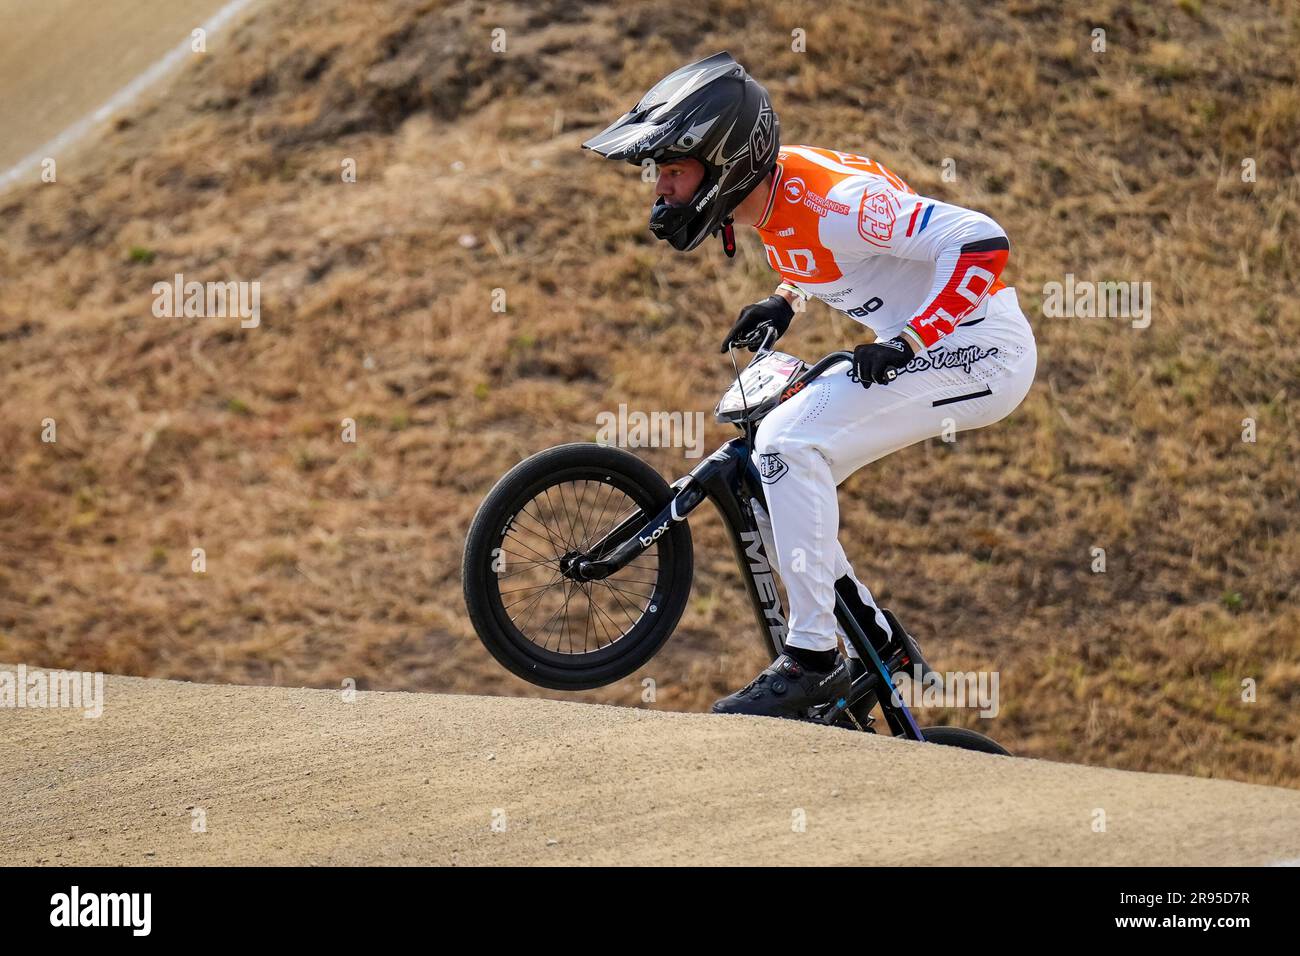 ARNHEM, NETHERLANDS - JUNE 24: Niek Kimmann of the Netherlands competes in  the 1/8 Finals during Round 3 of the 2023 UCI BMX Racing World Cup at  Sportcentrum Papendal on June 24,